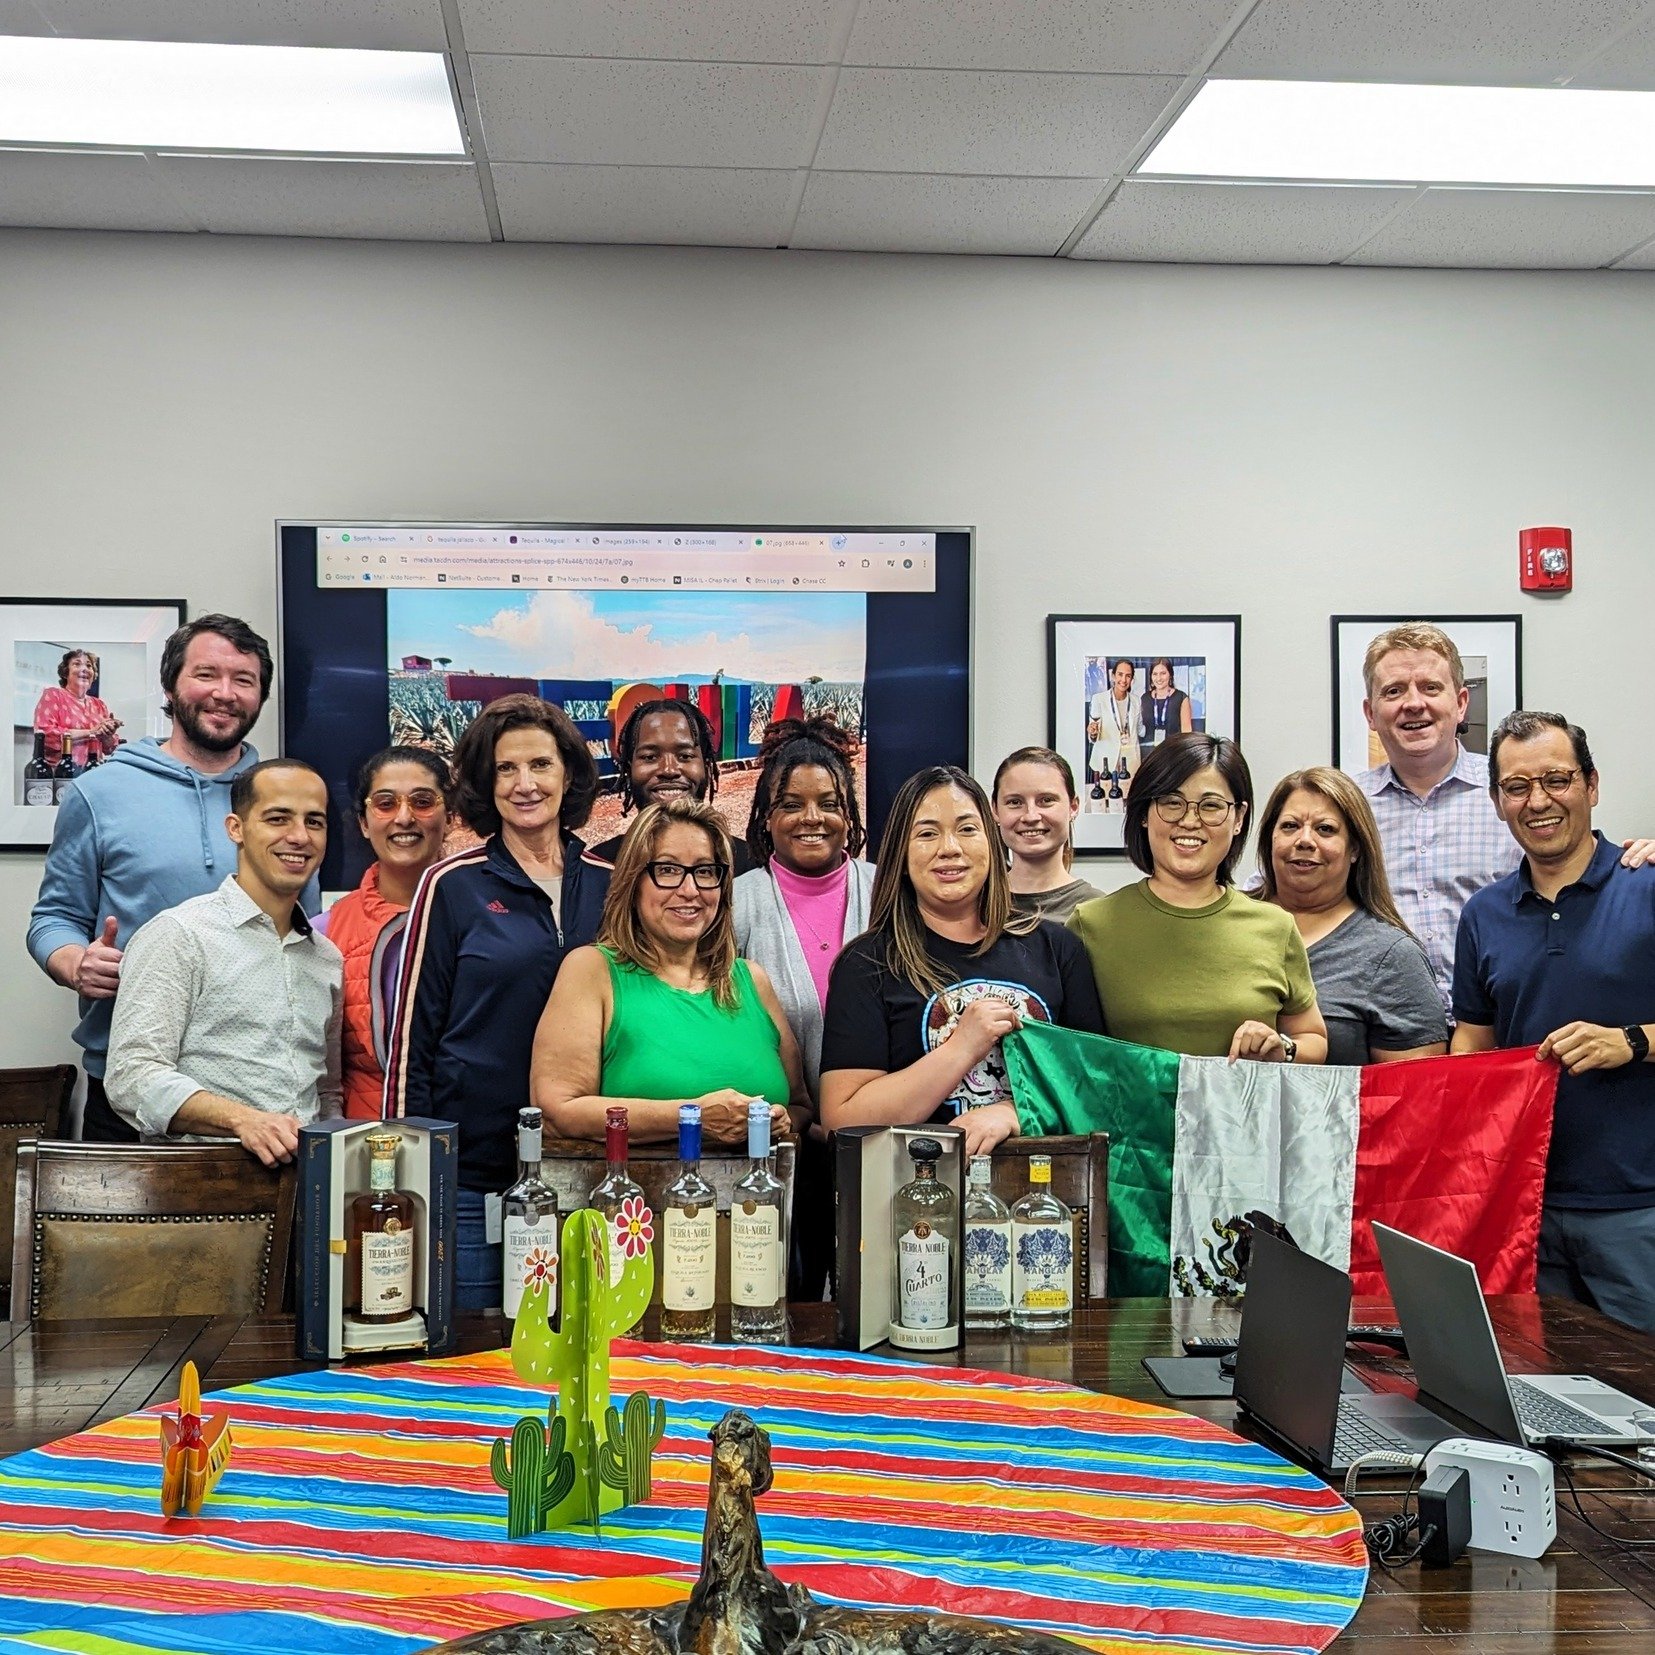 We had a great time learning about tequila and mezcal at today's Cinco de Mayo tasting at MISA HQ! The featured spirits that we were able to sample were Tierra Noble Tequila (always 100% Blue Agave and 100% additive free) and Casa Manglar Mezcal (mad